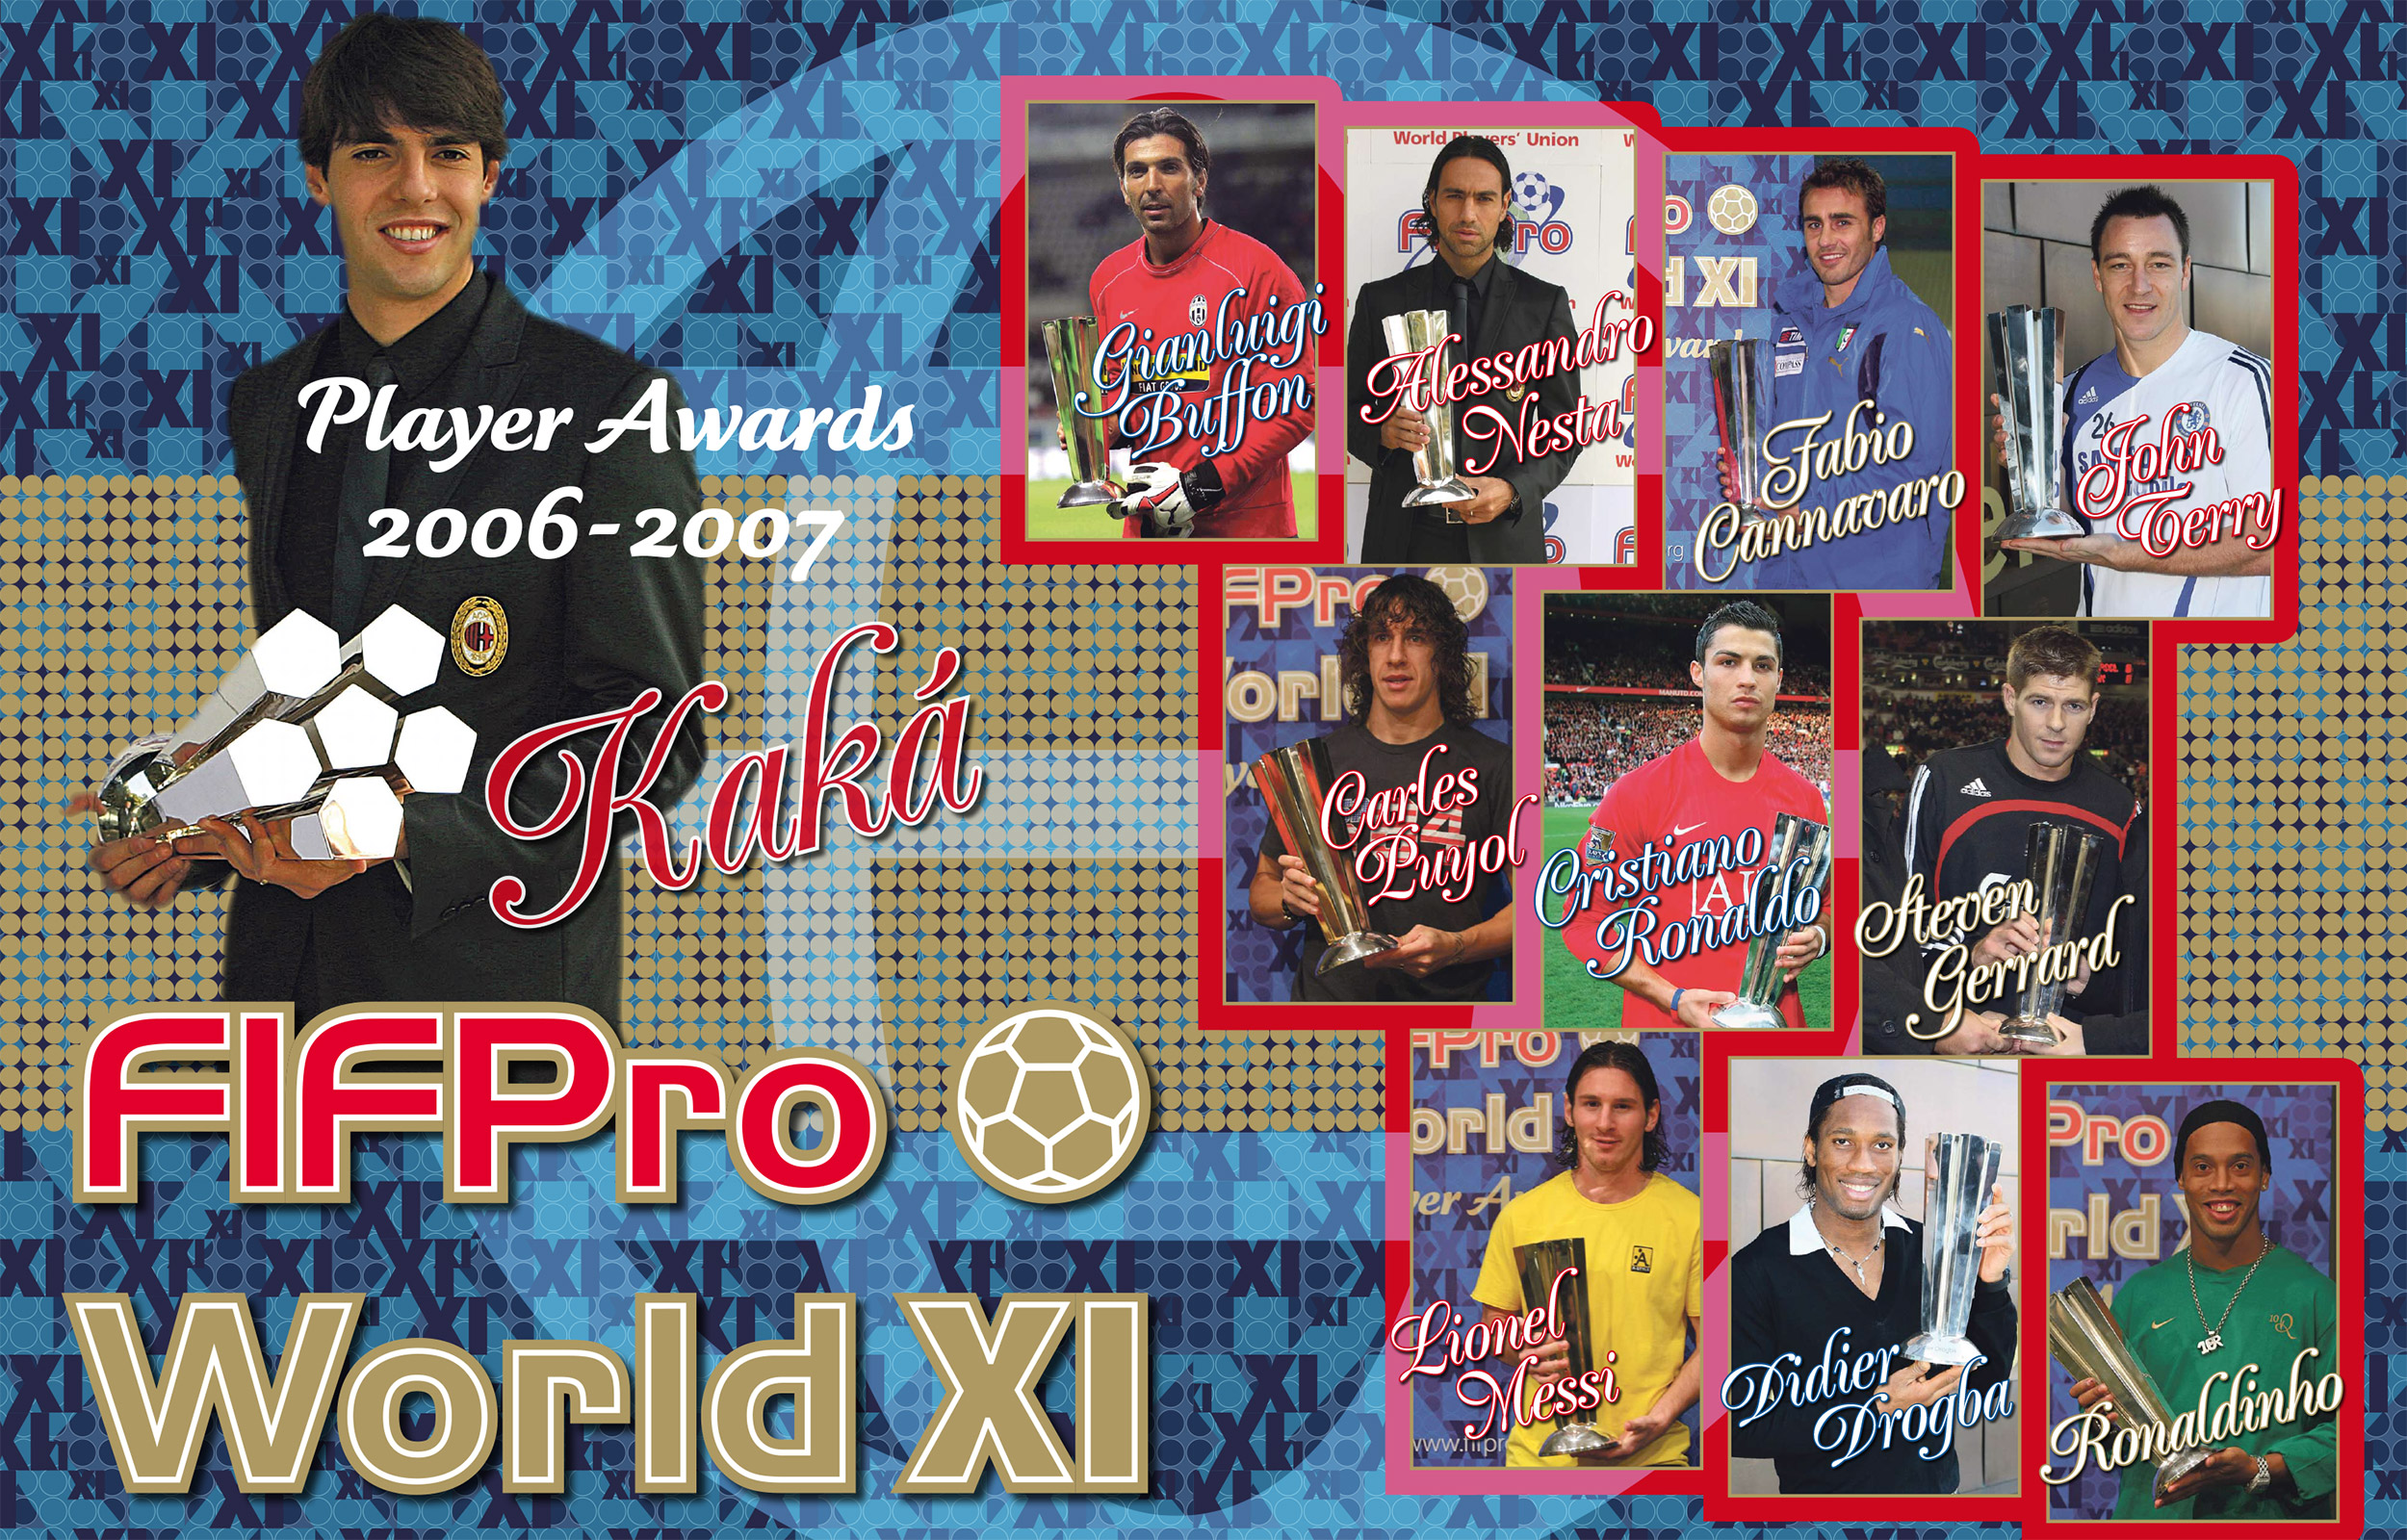 History - The FIFPRO World 11 of 2006-2007 - FIFPRO World Players' Union